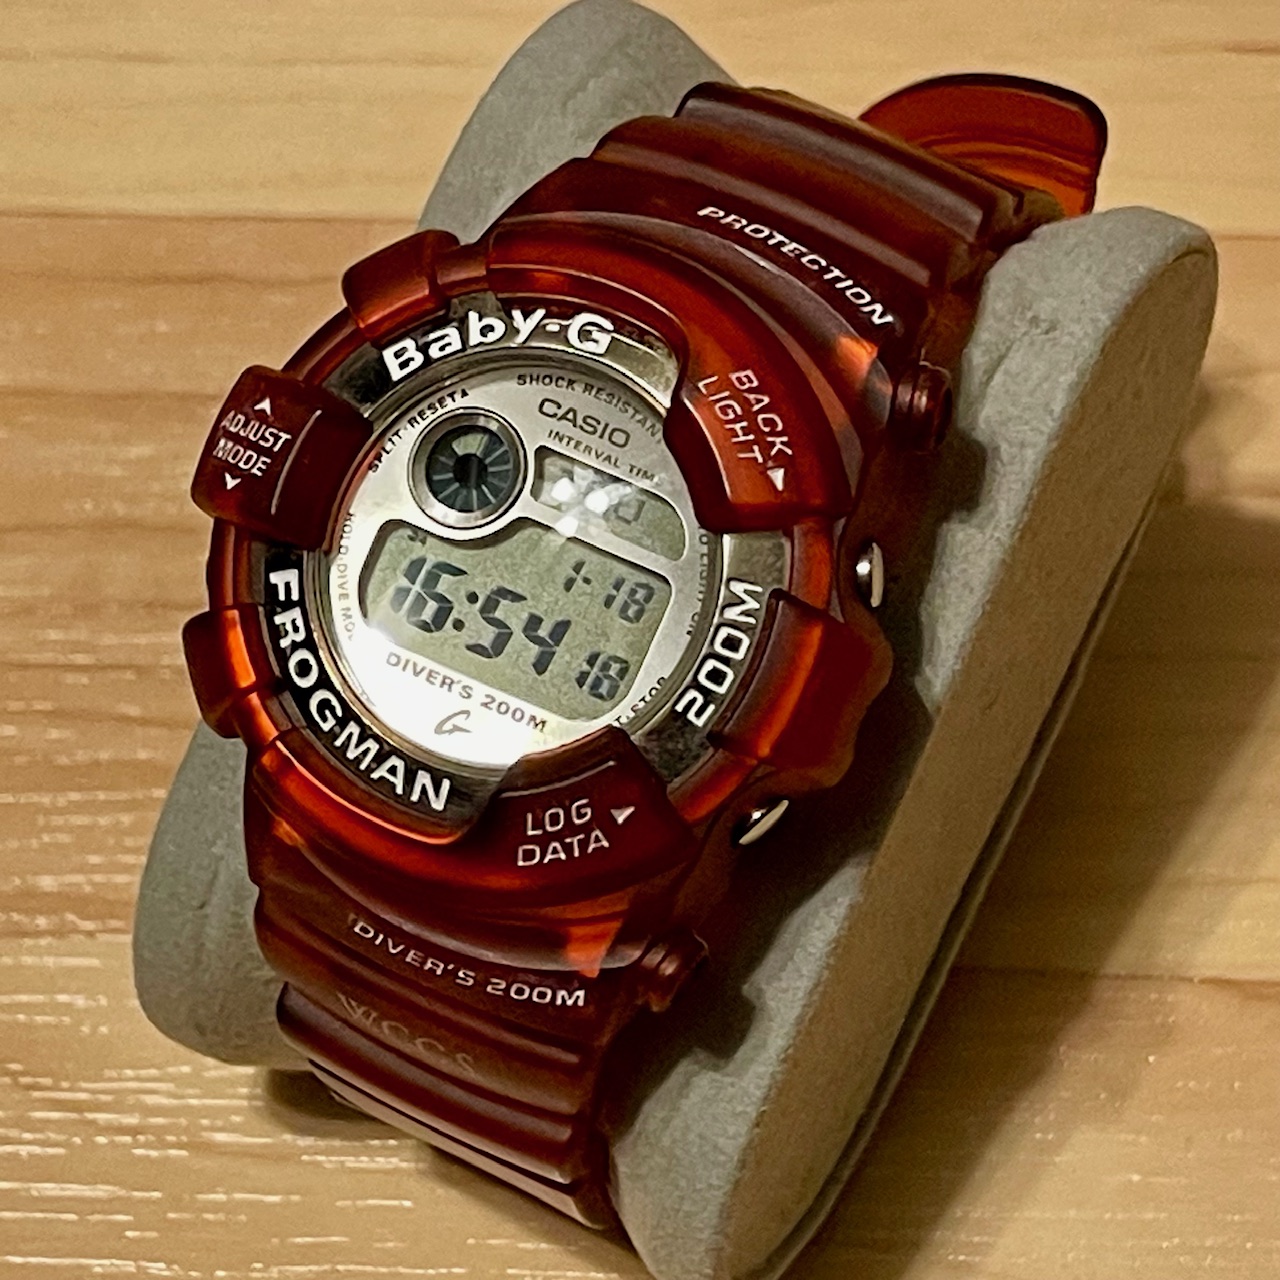 WTS] Casio G-Shock Baby-G Frogman Candy Apple Red Custom Jelly 